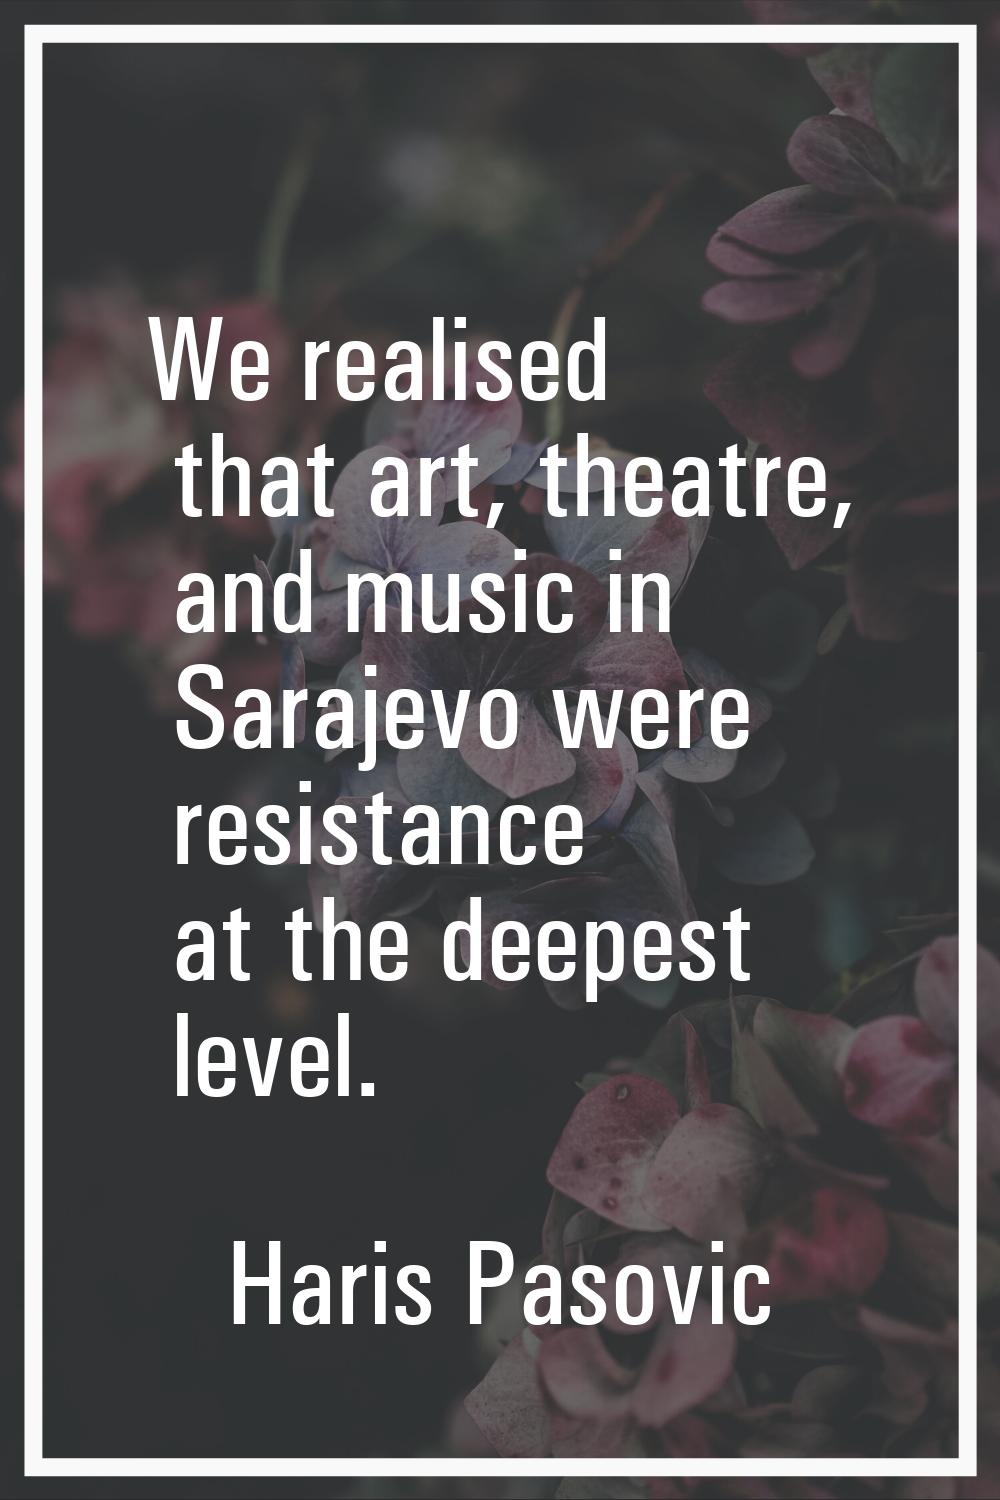 We realised that art, theatre, and music in Sarajevo were resistance at the deepest level.